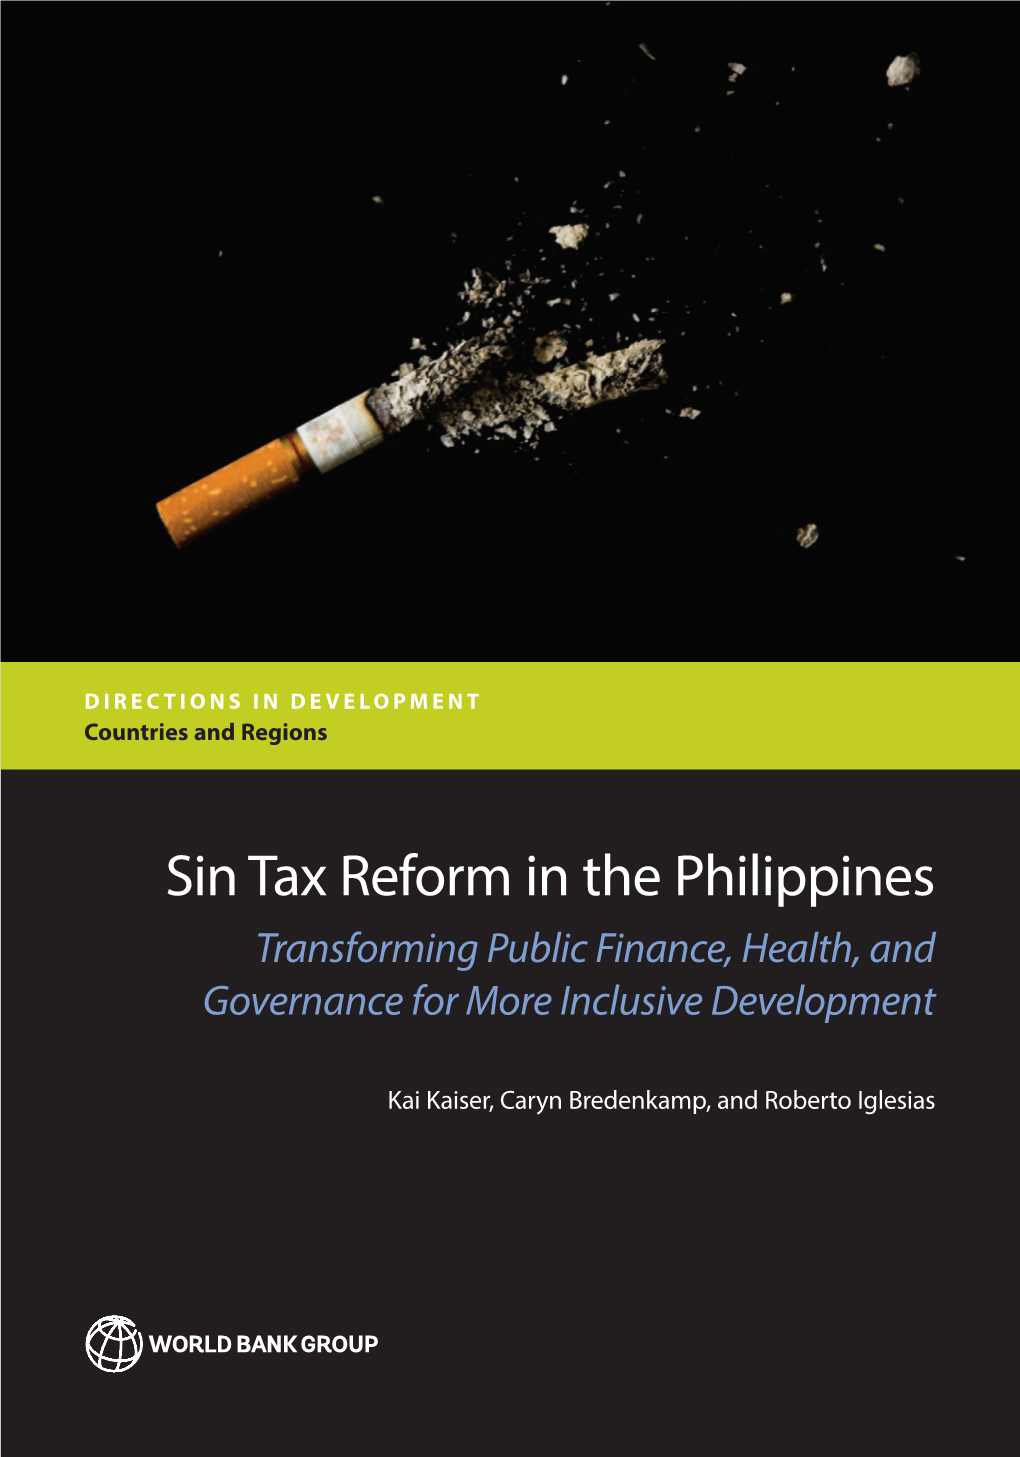 Sin Tax Reform in the Philippines Reform Tax Sin DIRECTIONS in DEVELOPMENT DIRECTIONS in Countries and Regions Countries